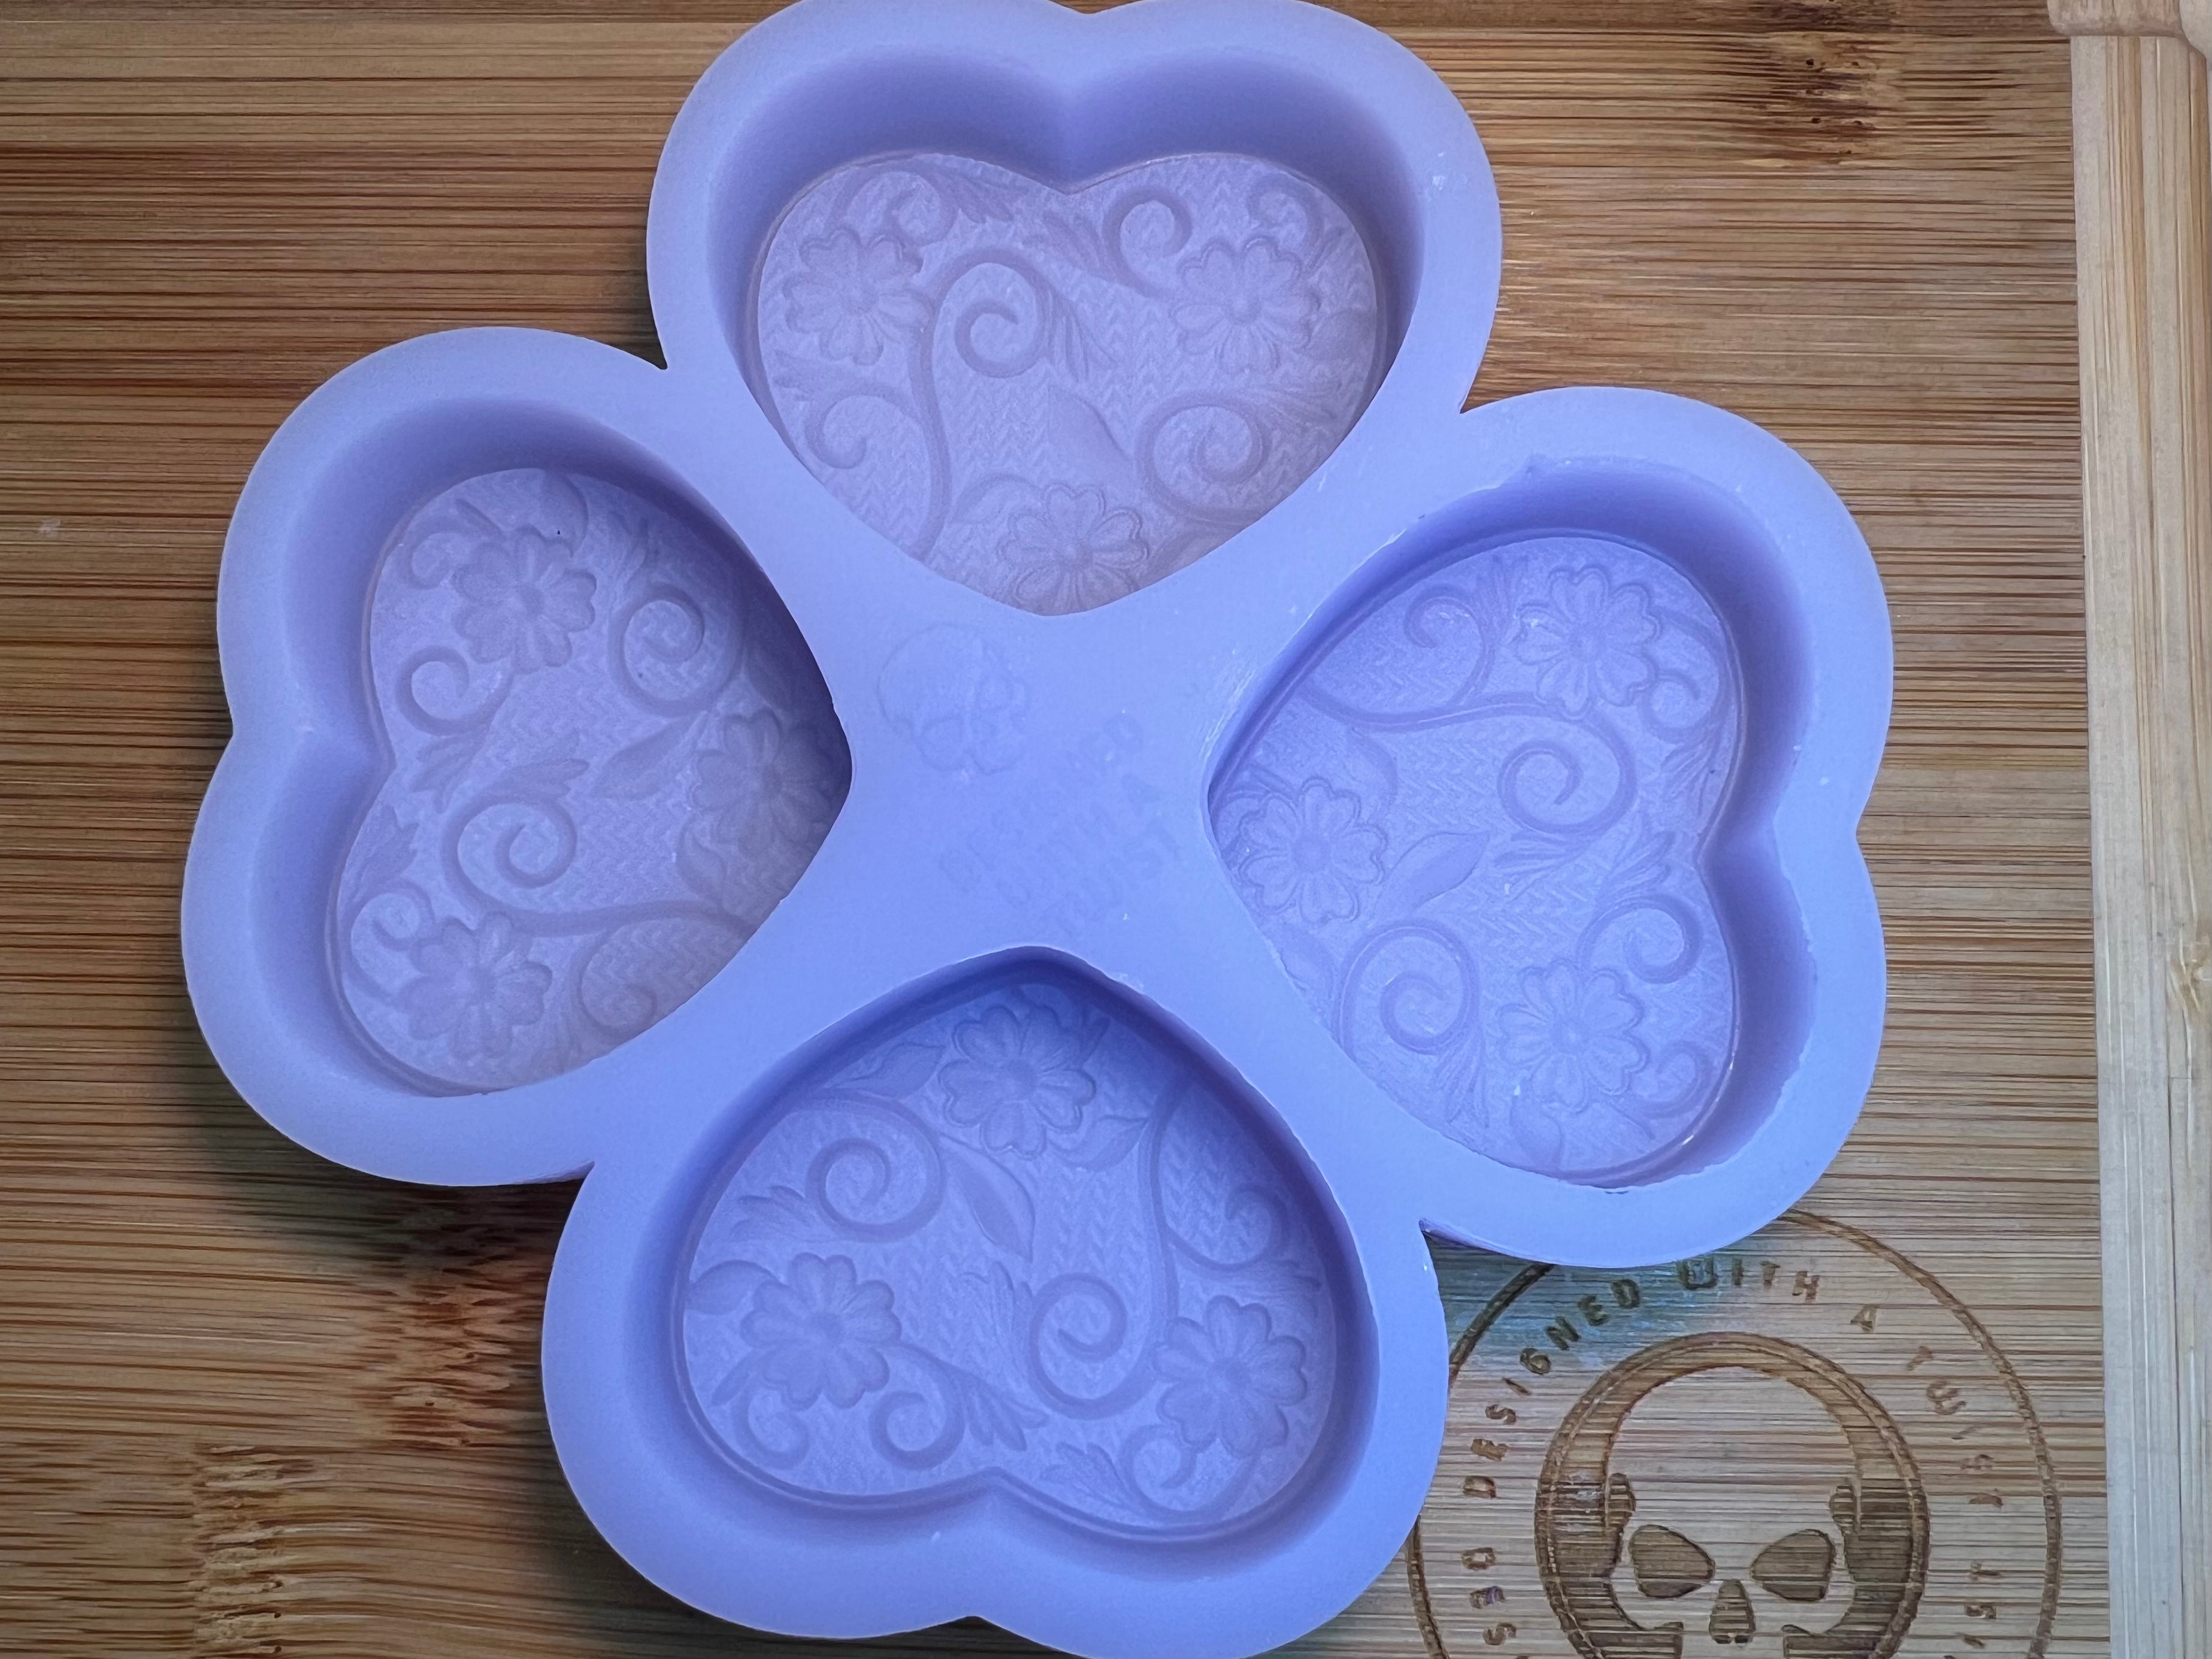 3d Flower Heart Silicone Mold - Designed with a Twist  - Top quality silicone molds made in the UK.